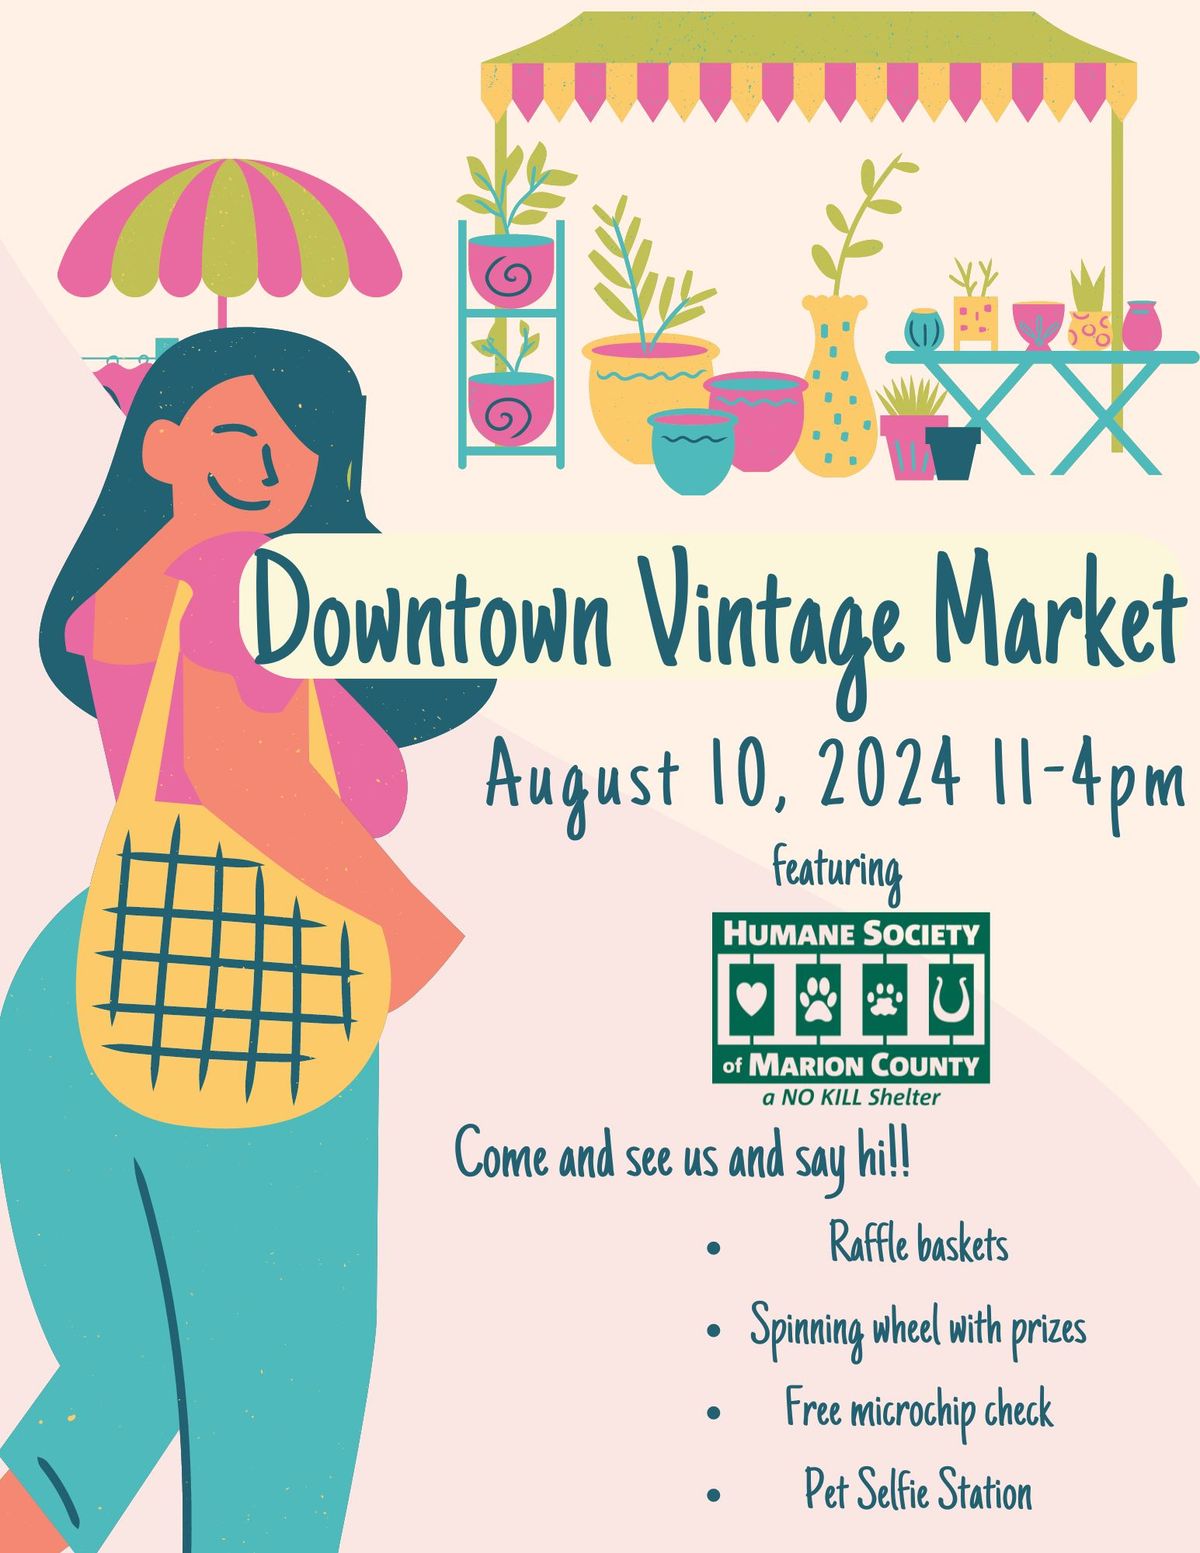 Downtown Vintage Market Event with the Humane Society